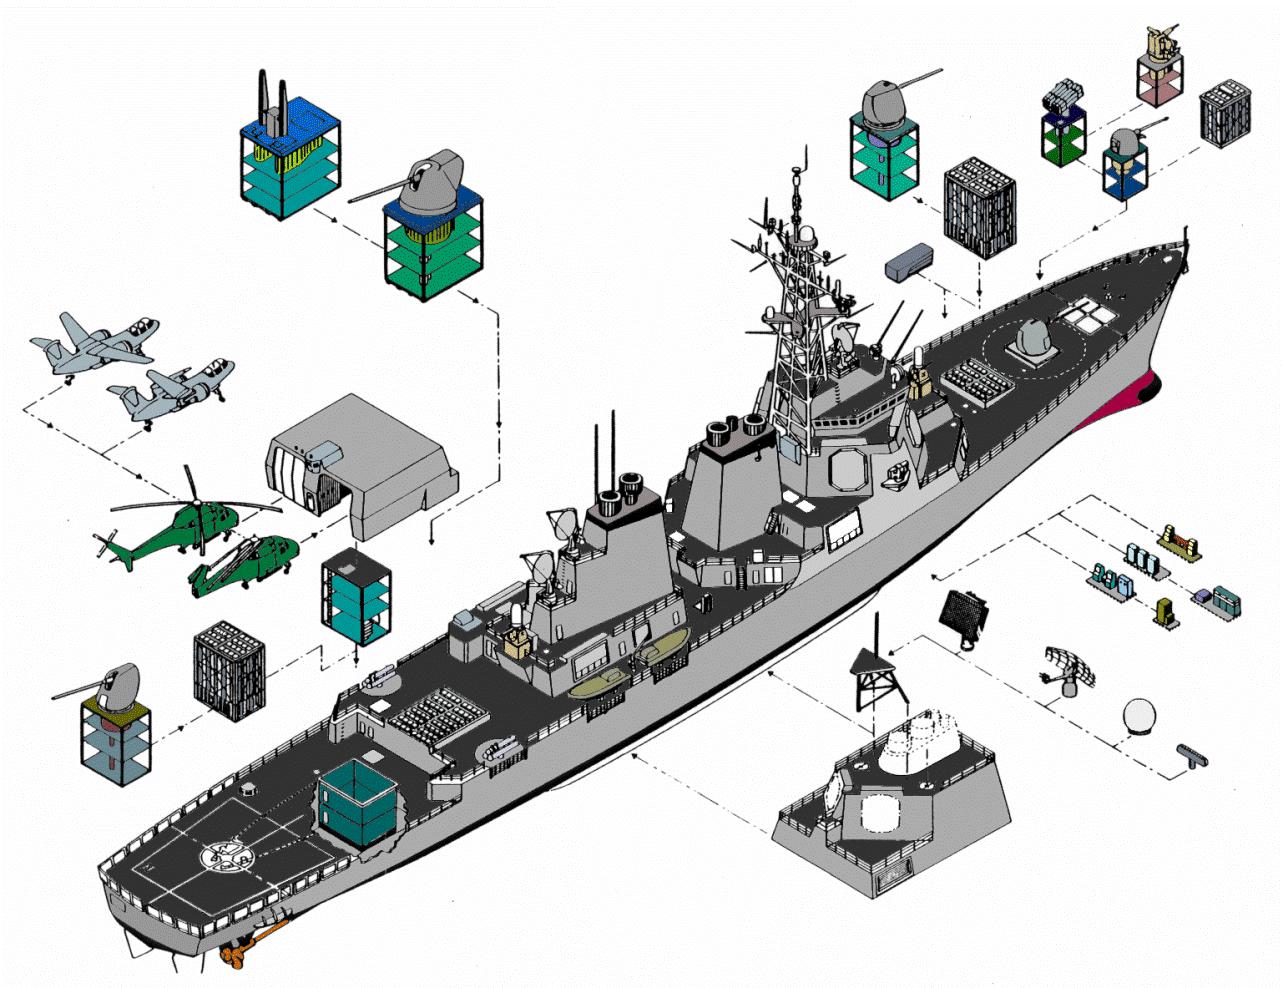 Artist's rendering of open architecture systems on a Arleigh Burke (DDG-51) guided missile destroyer. AOC Incorporated Image